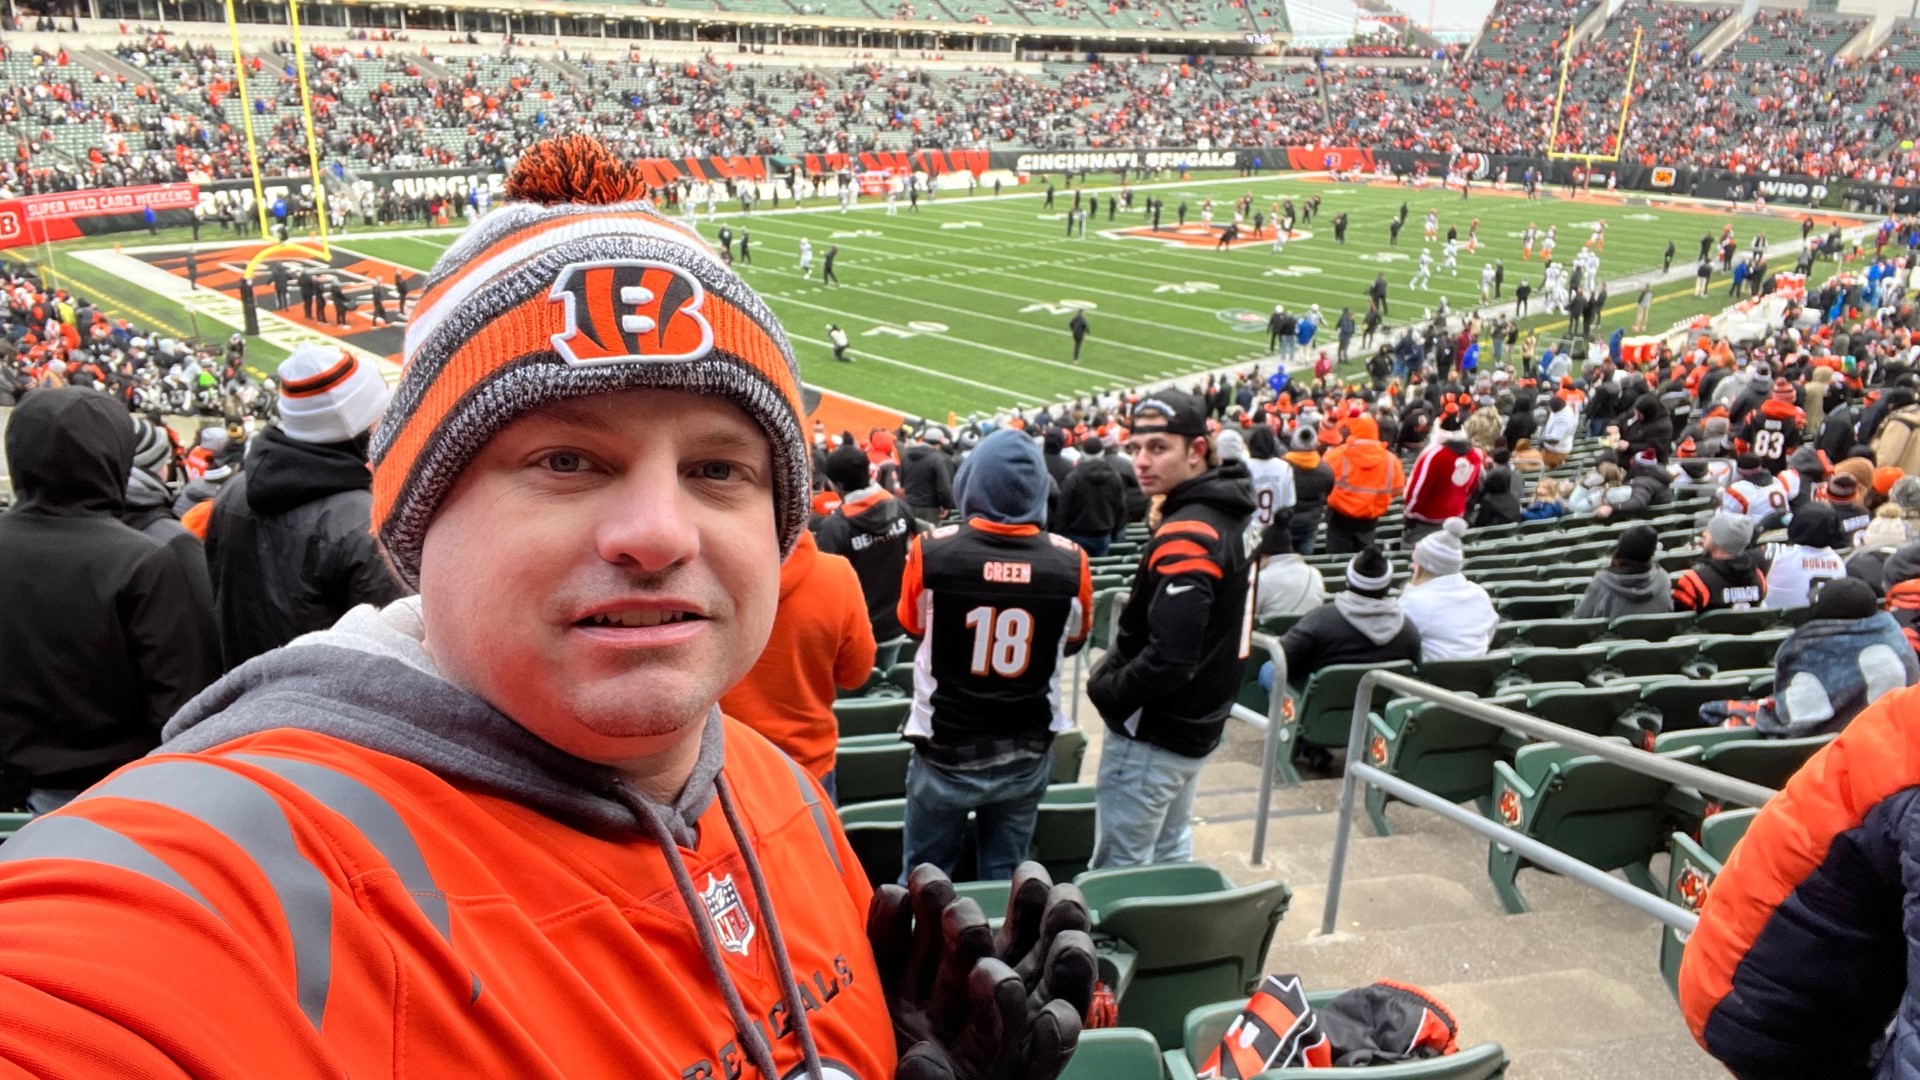 Bengals fan on the brink of big payout on preseason bet